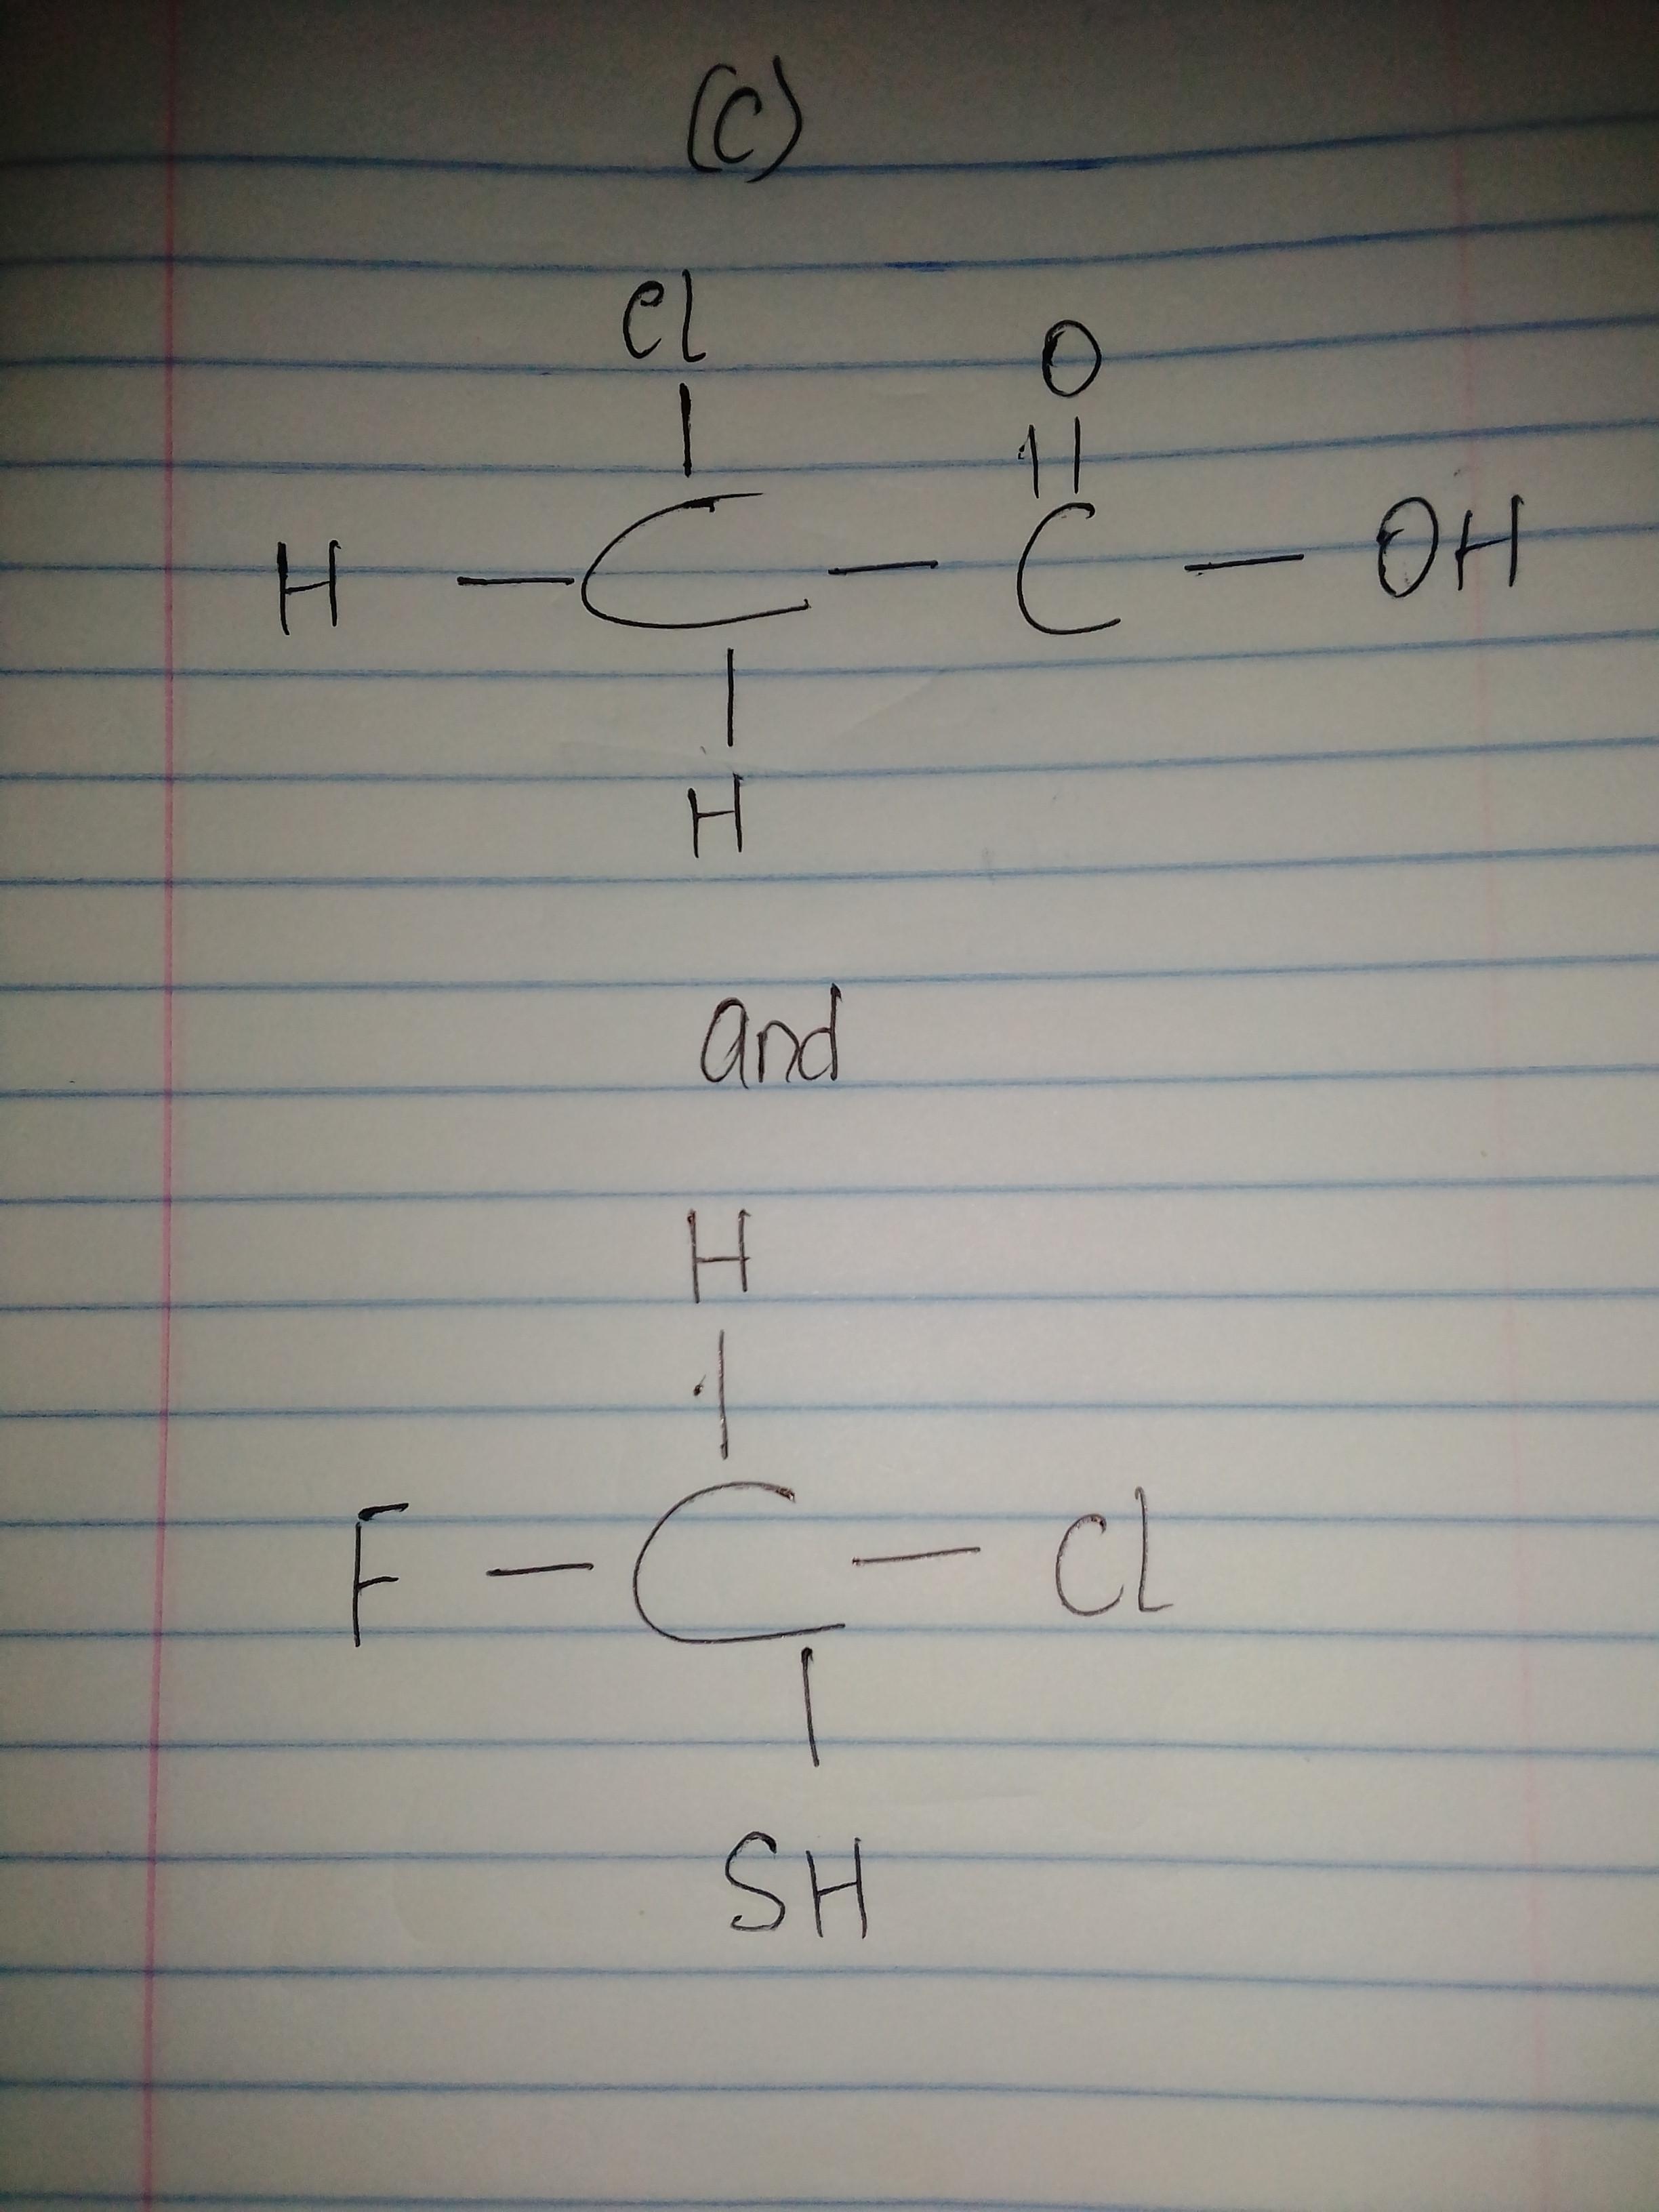 Draw Molecules That Satisfy The Following Prompts: 1. All Molecules Must Have A Minimum Of 12 Carbon